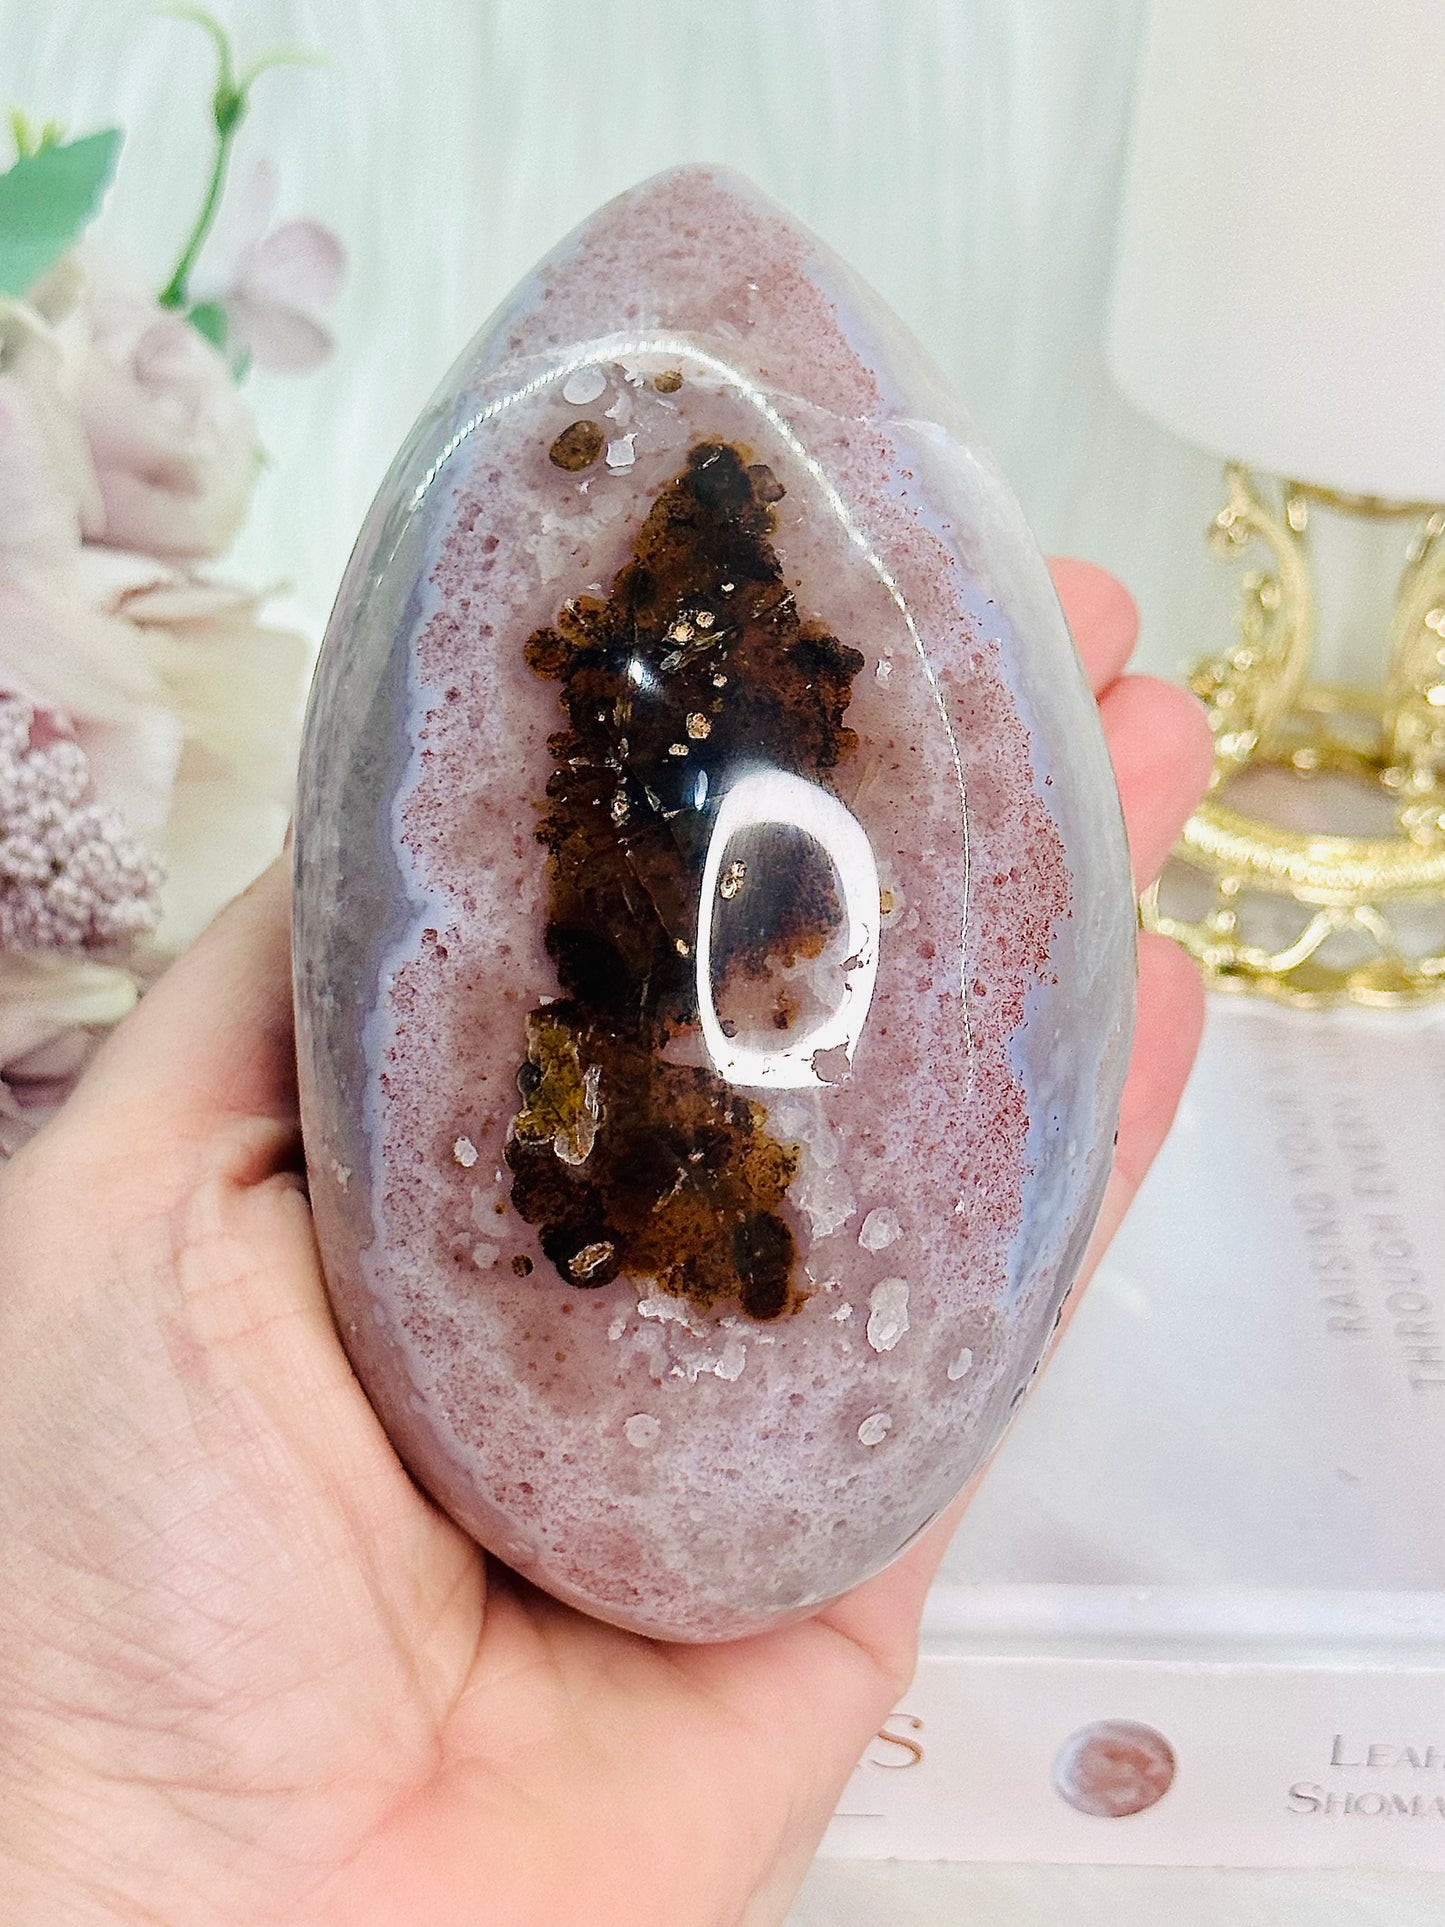 TOTALLY IN LOVE!!!!! Absolutely Divine Large 718gram Druzy Agate Carved Egg On Stand ~ An Exquisite Piece